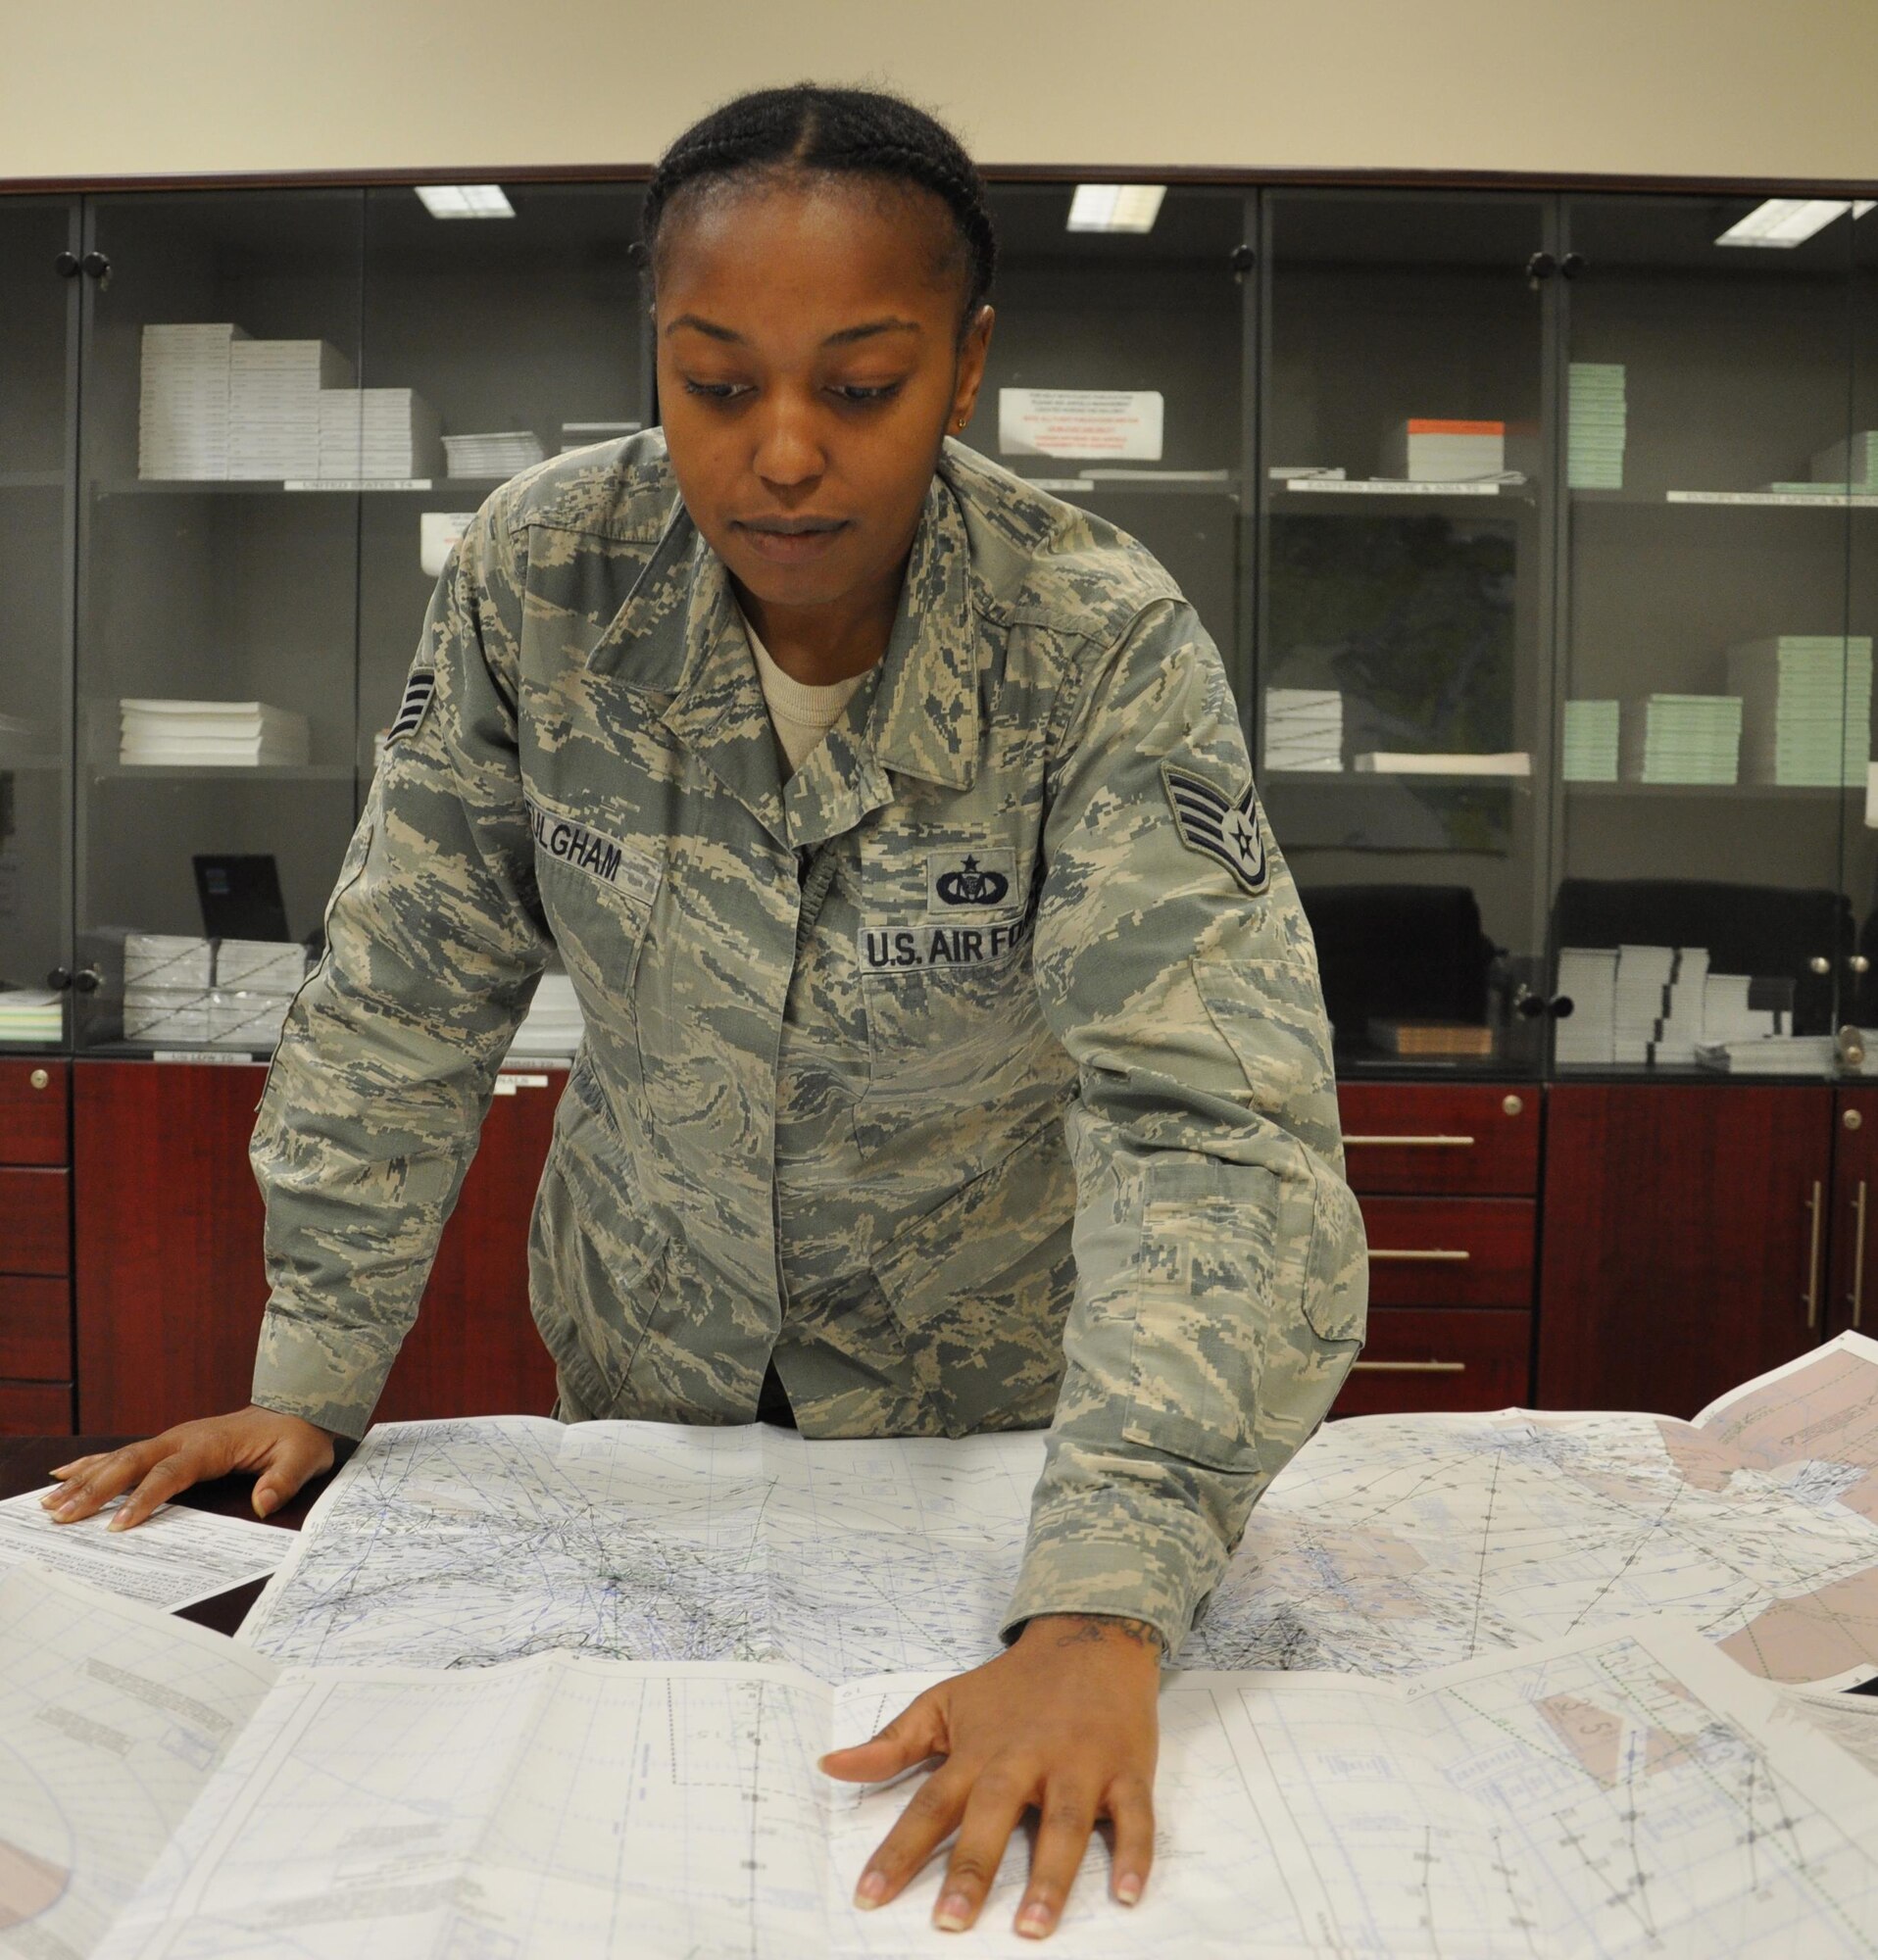 Staff Sgt. Talia Fulgham, 379th Expeditionary Operations Support Squadron Airfield Management operations noncommissioned officer in charge from Alliance, Ohio, looks at a map at Al Udeid Air Base, Qatar March 17. As the NCOIC of the 379 EOSS Airfield Management office, Fulgham is responsible for ensuring all flight plans are filed properly. She uses maps, like the one pictured here, to identify discrepancies with submitted flight plans. The 379 EOSS Airfield Management team reviewed more than 20,000 flight plans in 2015. (U.S. Air Force photo by Tech. Sgt. James Hodgman/Released)